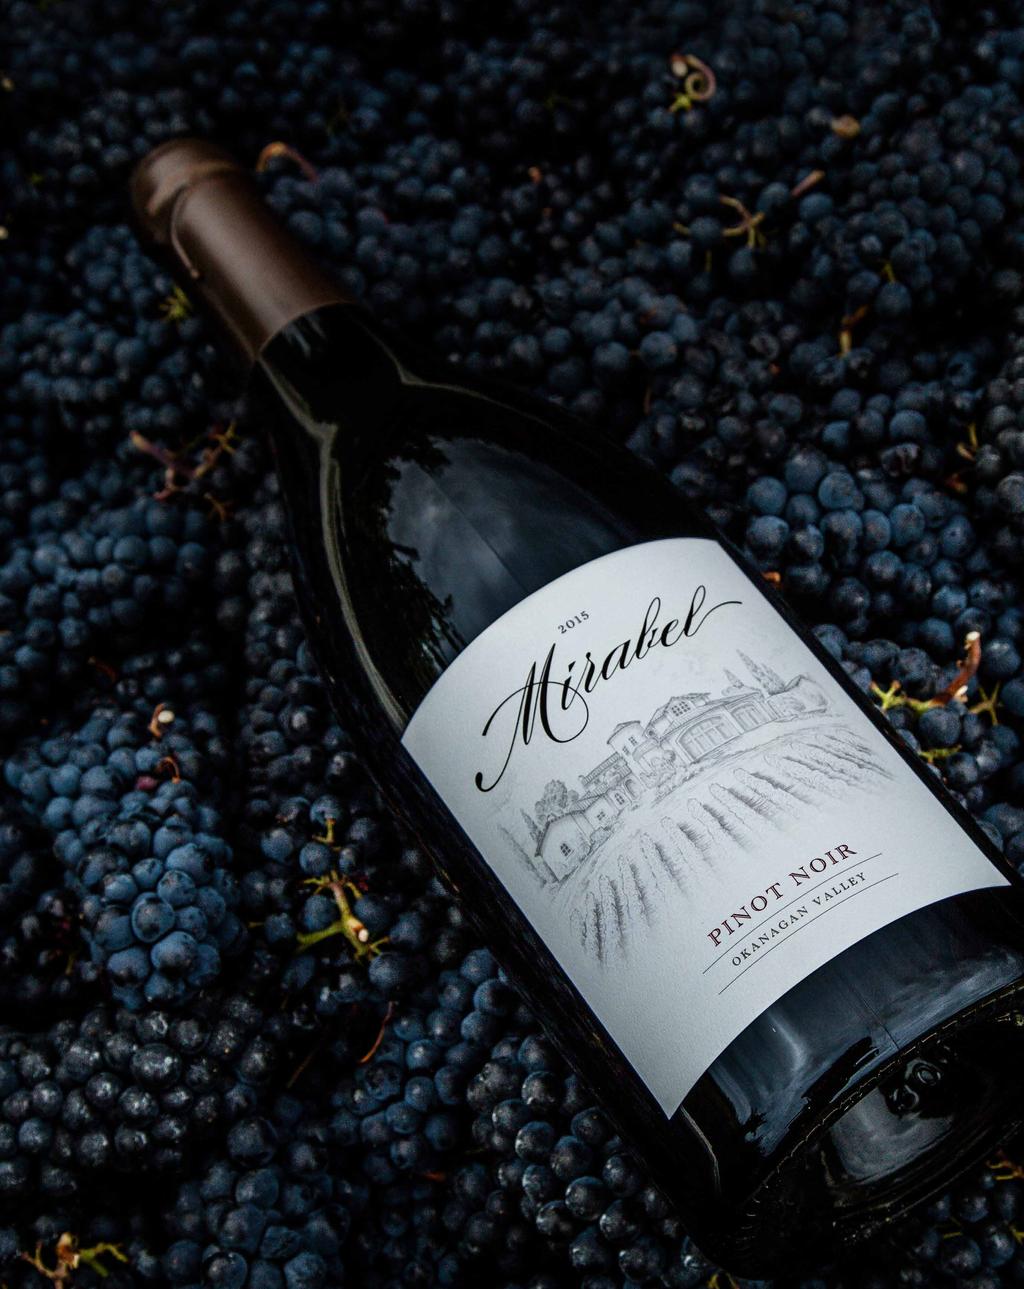 Wines 2015 PINOT NOIR Intensely aromatic, brooding dark fruits intertwine with subtle toasty nuances.